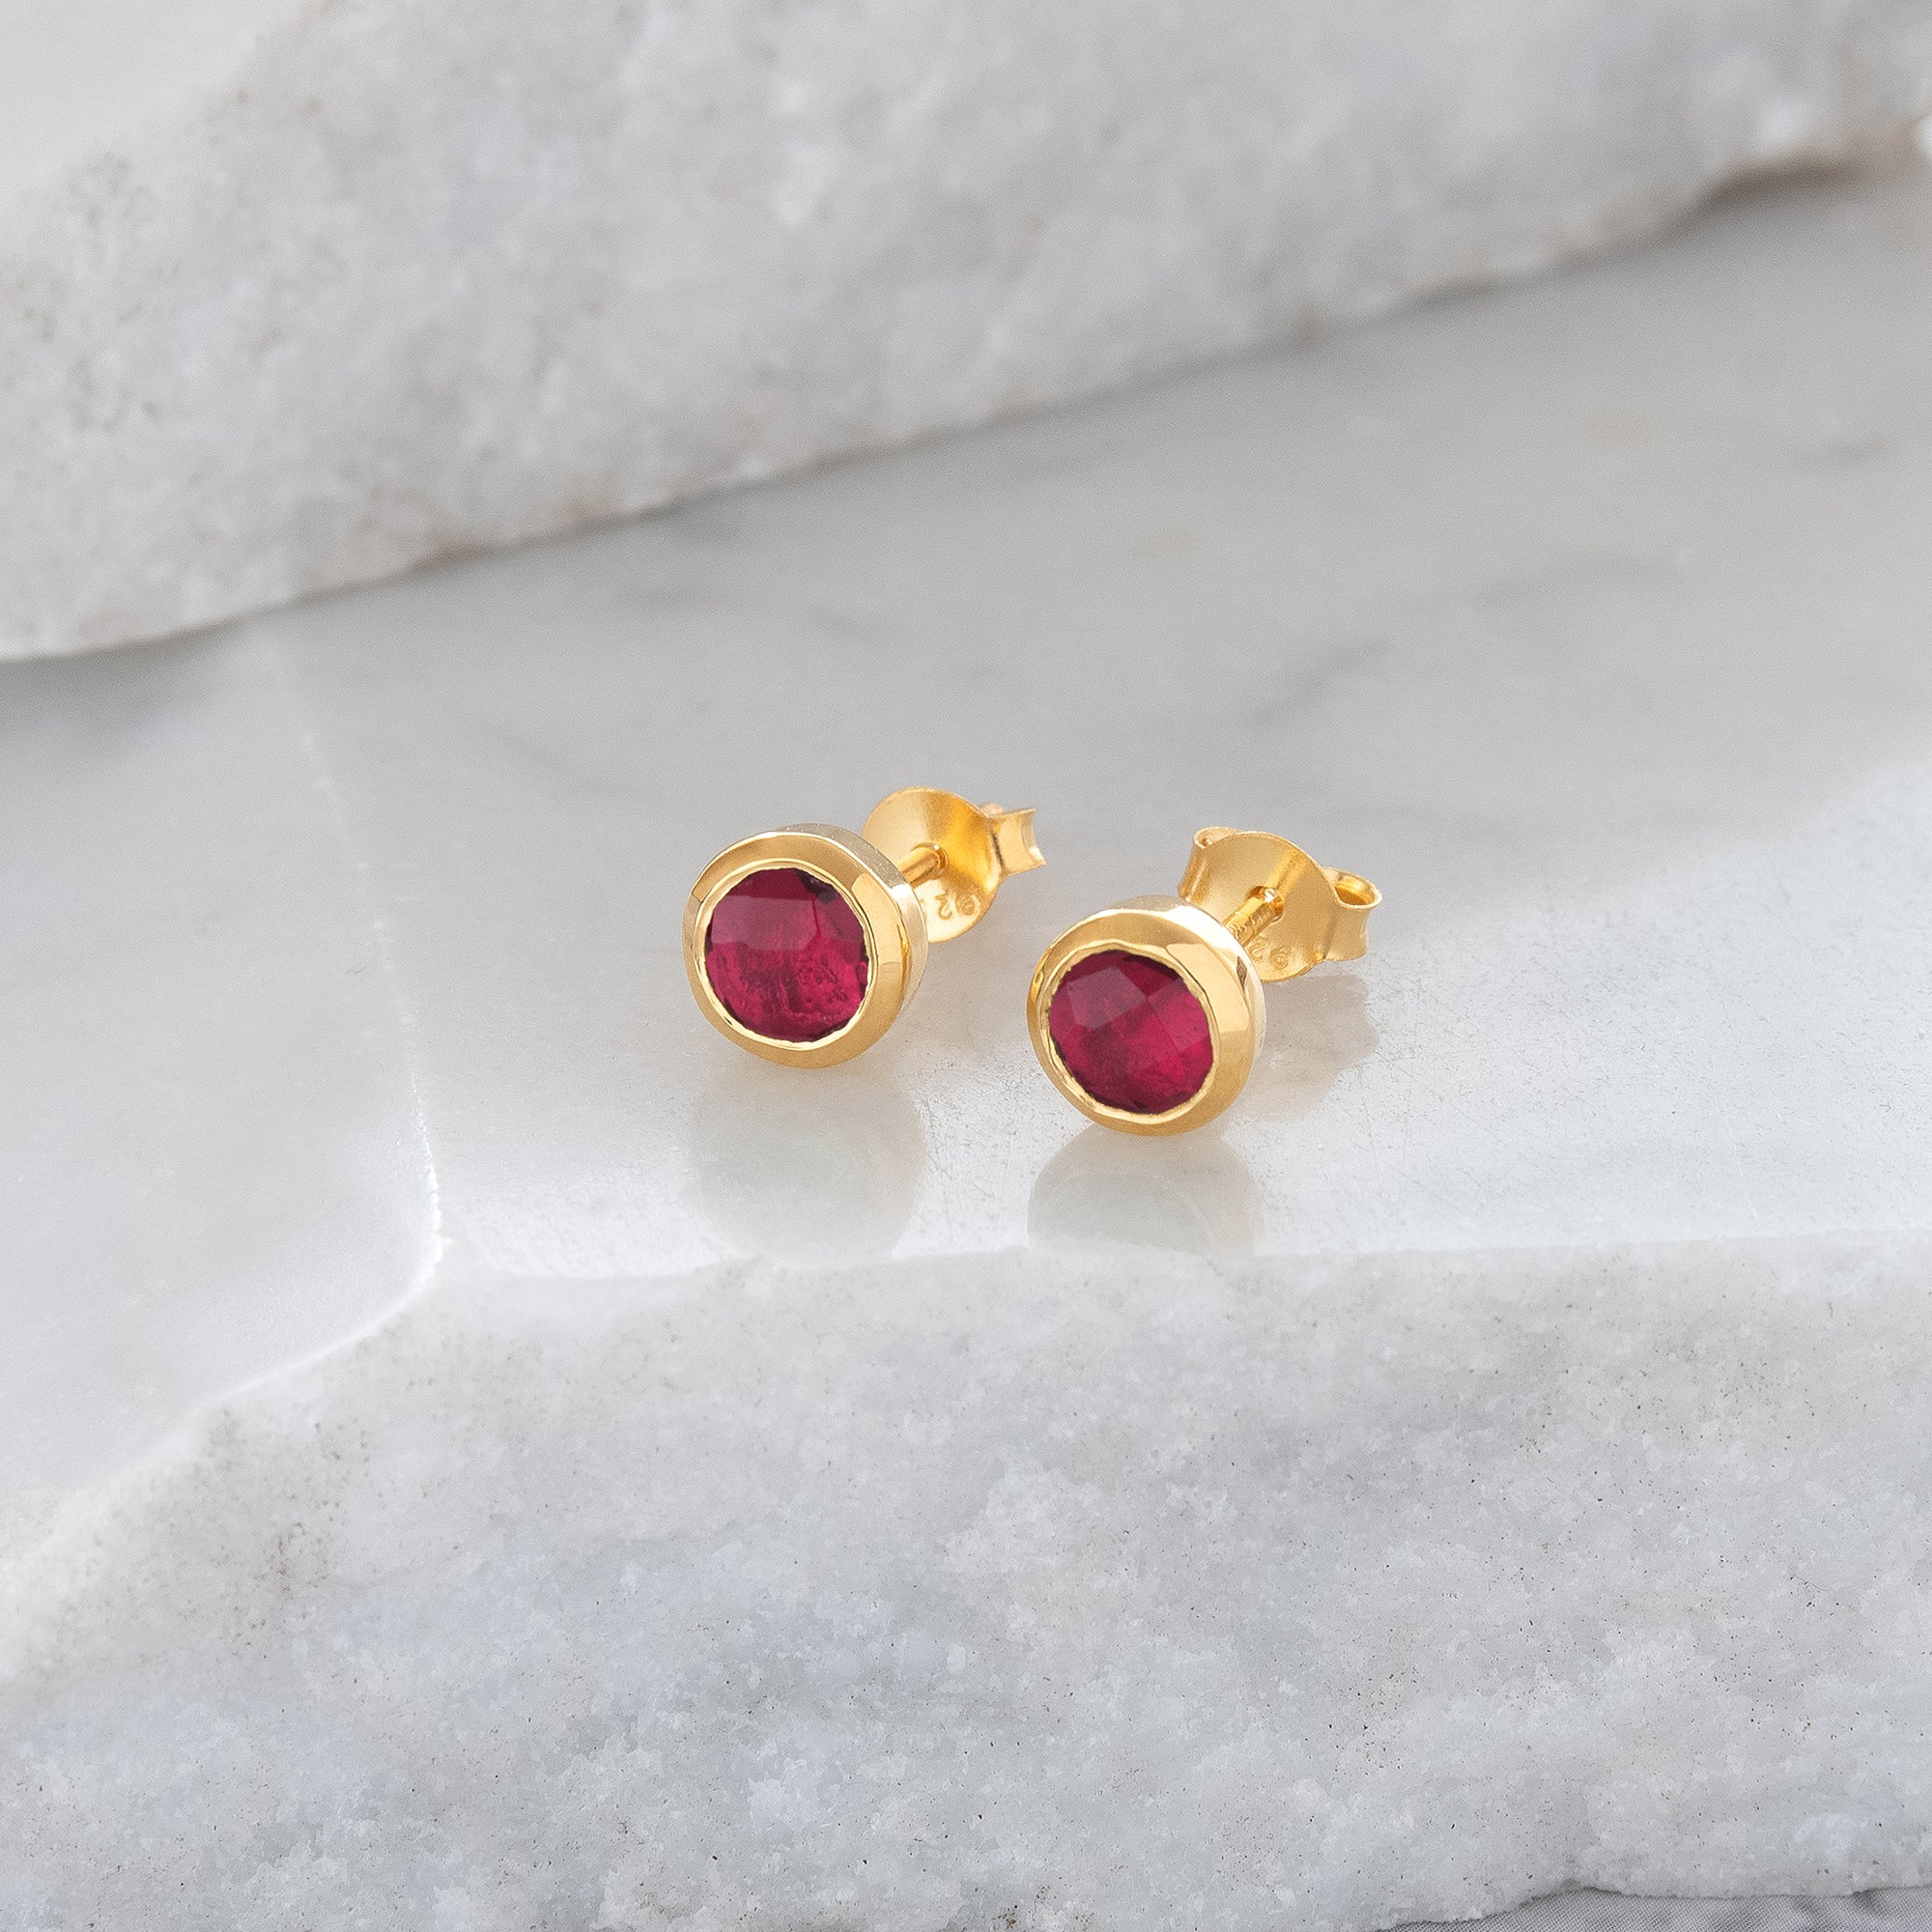 Birthstone Stud Earrings October: Pink Tourmaline and Gold Vermeil